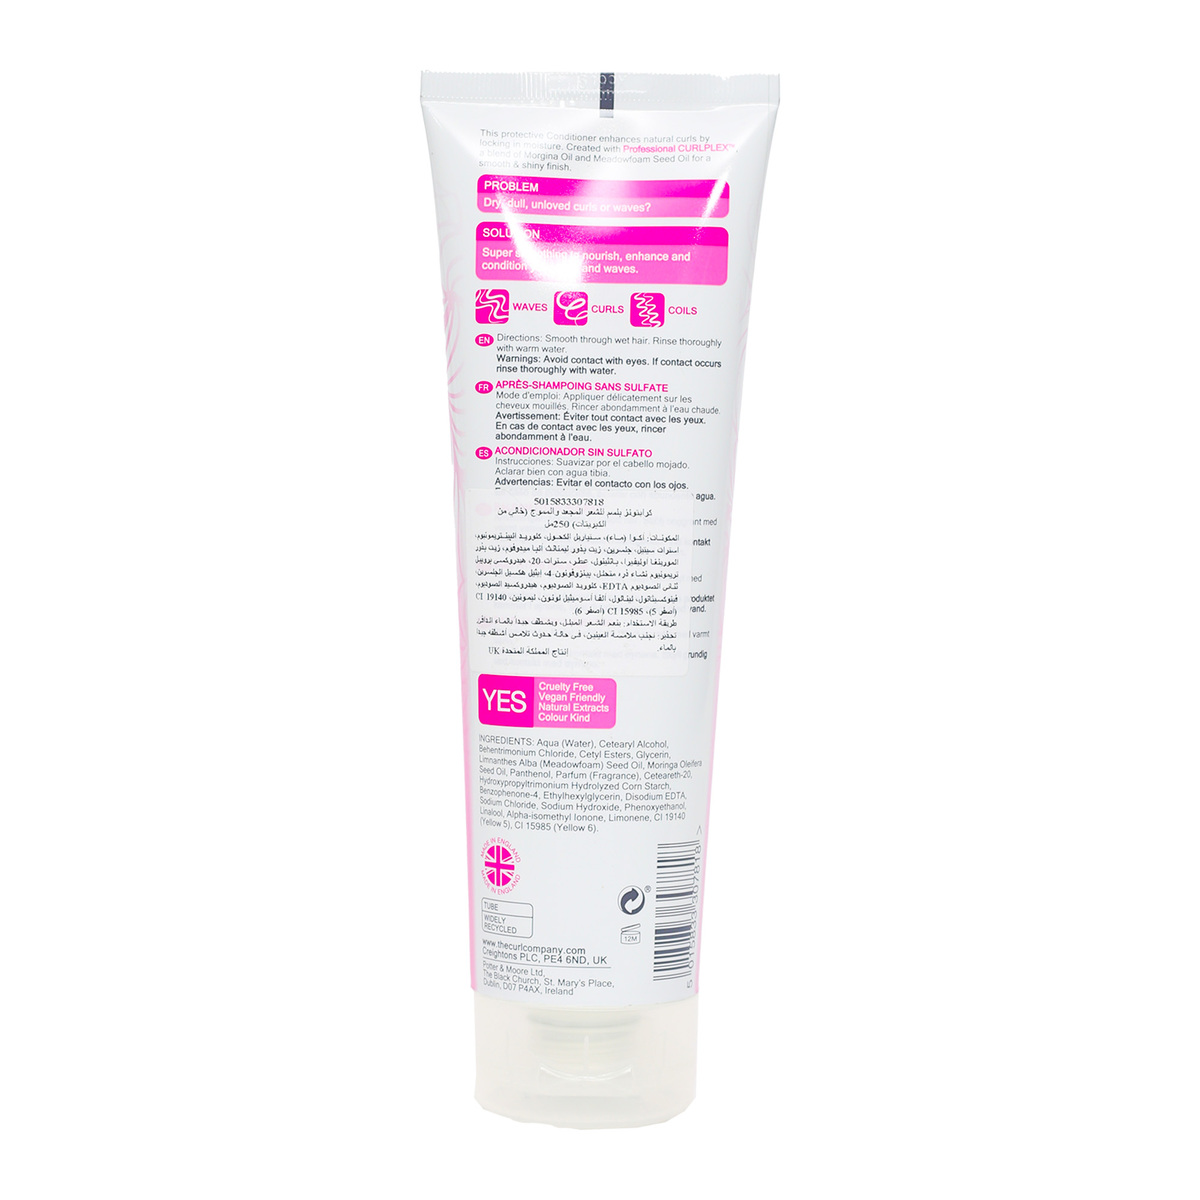 Creightons The Curl Company Sulphate Free Conditioner 250 ml